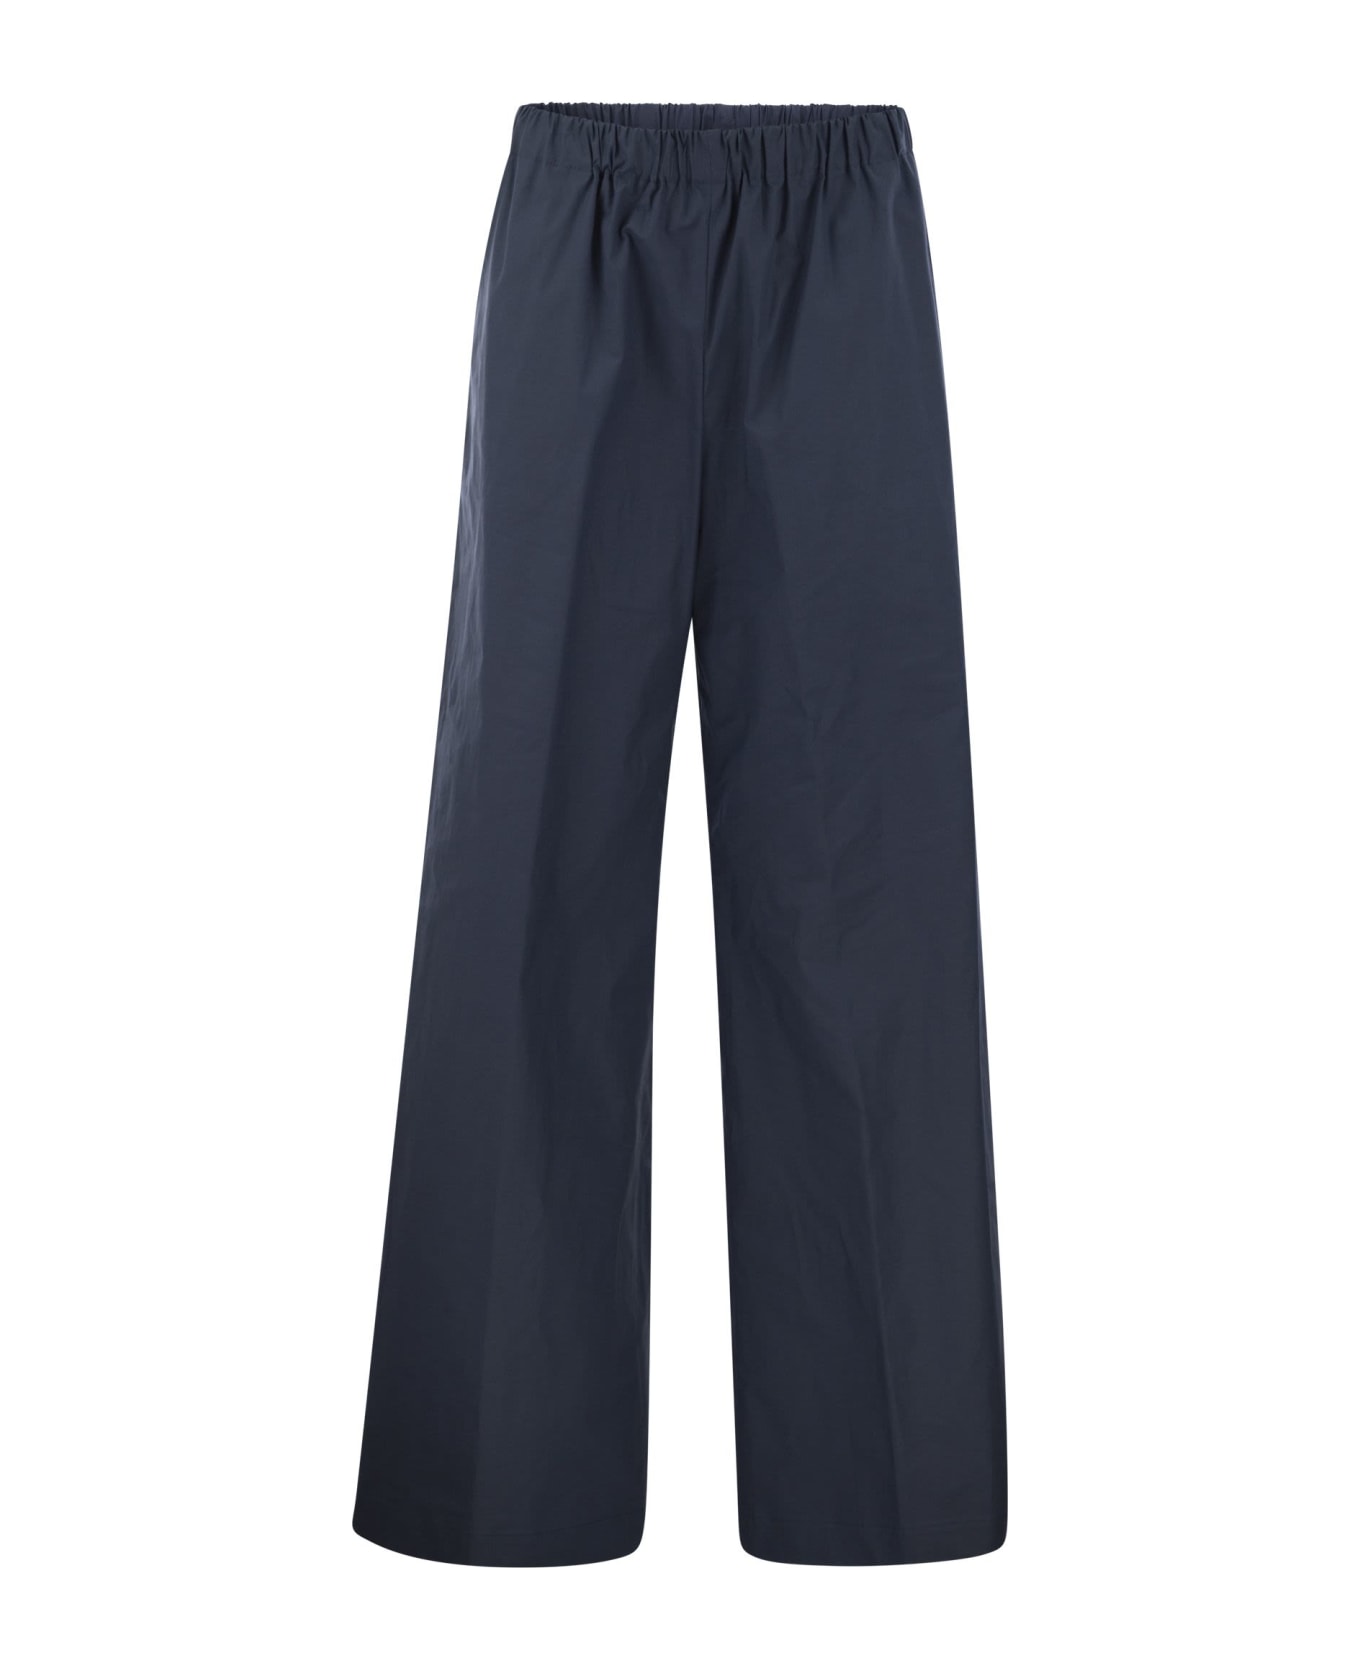 Antonelli Steven - Stretch Cotton Loose-fitting Trousers - Blue ボトムス